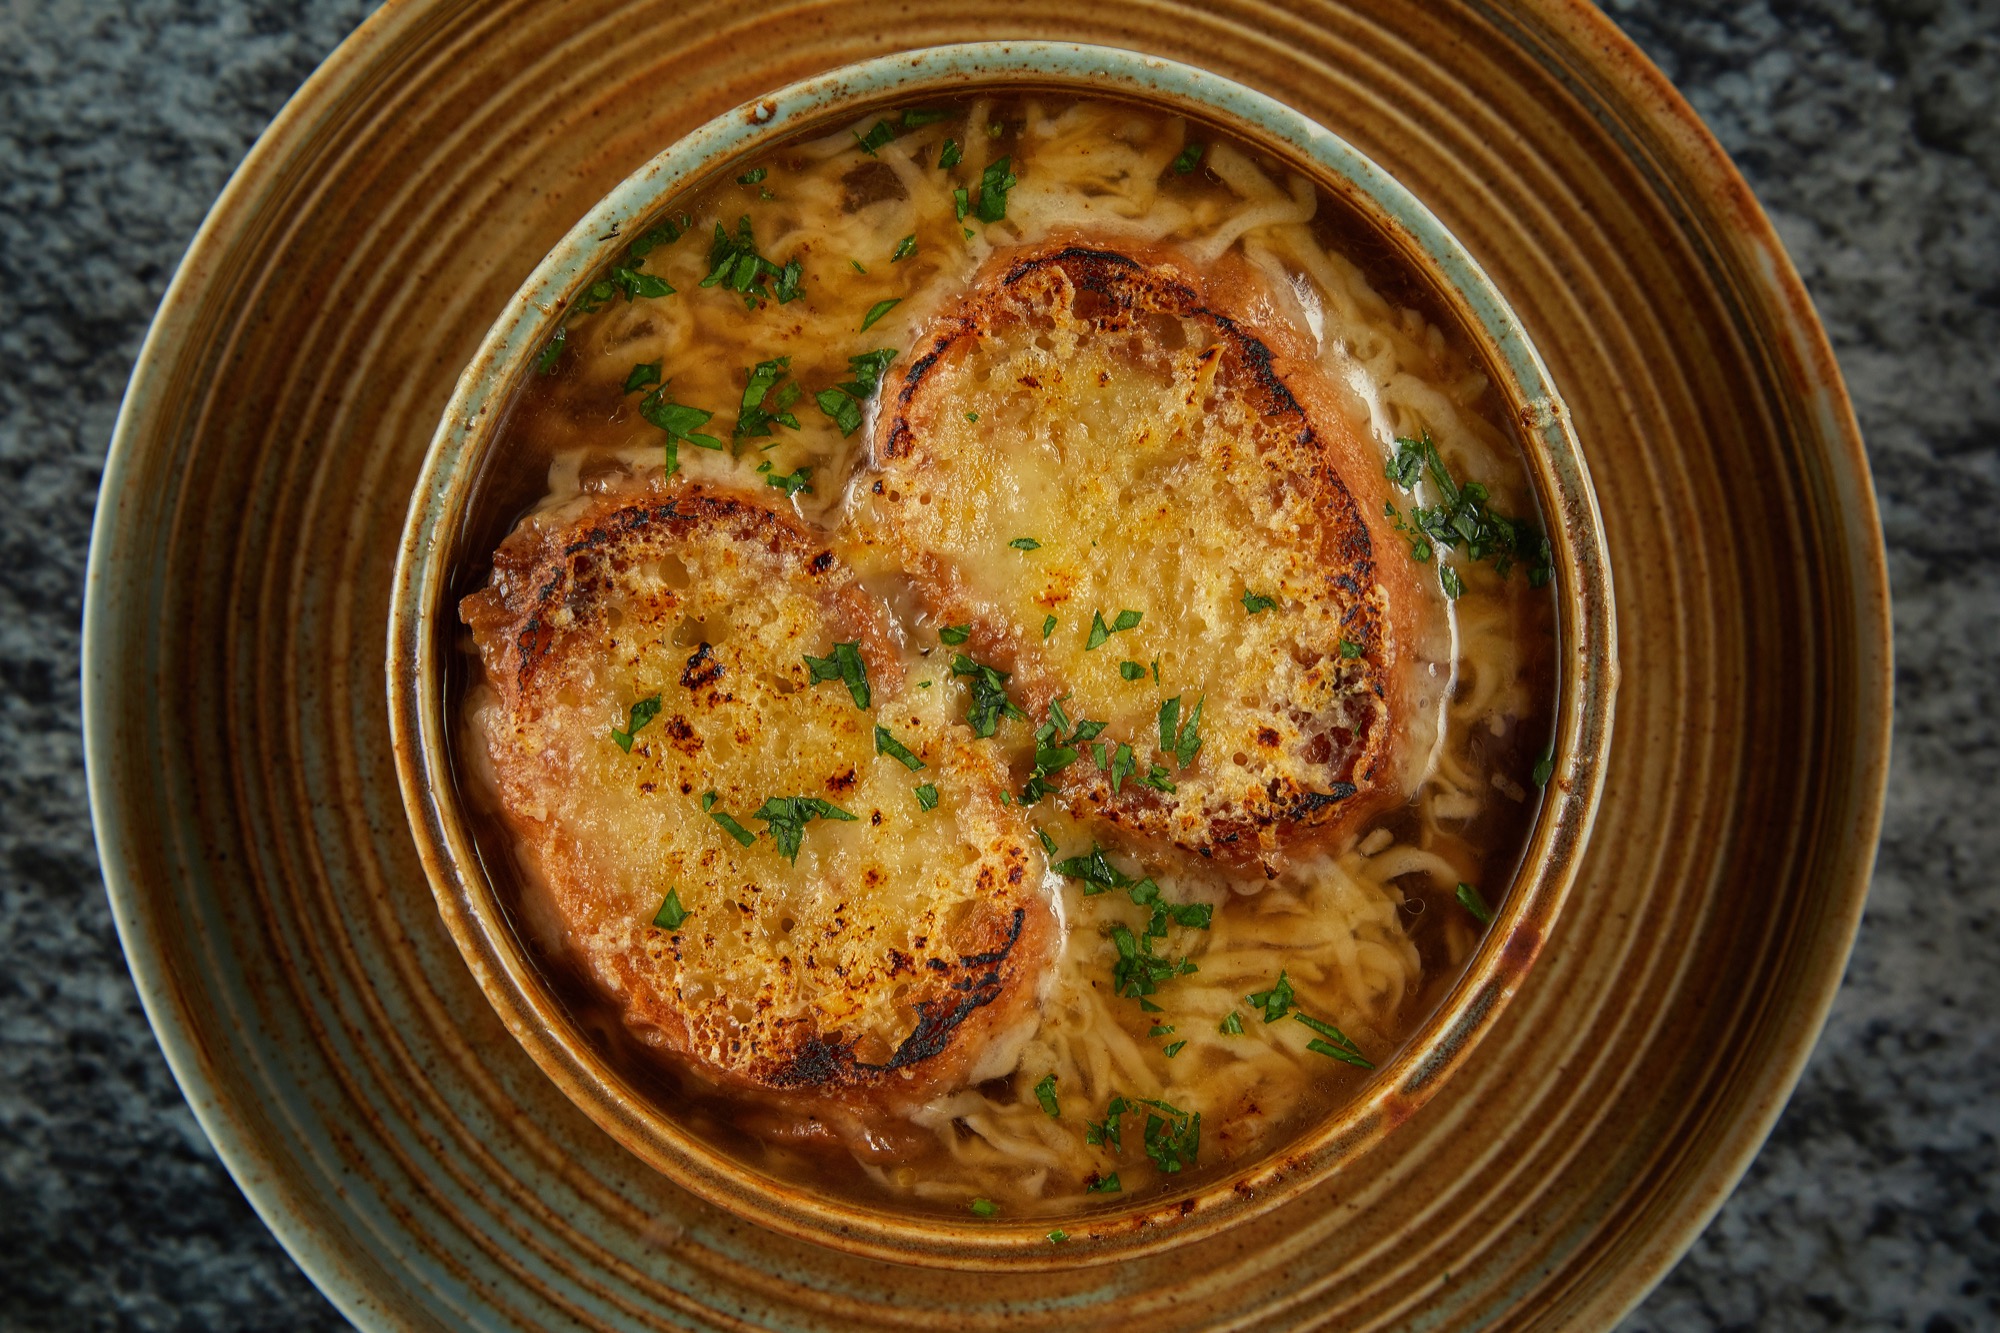 French_onion_soup_Ind_Restaurants.jpg